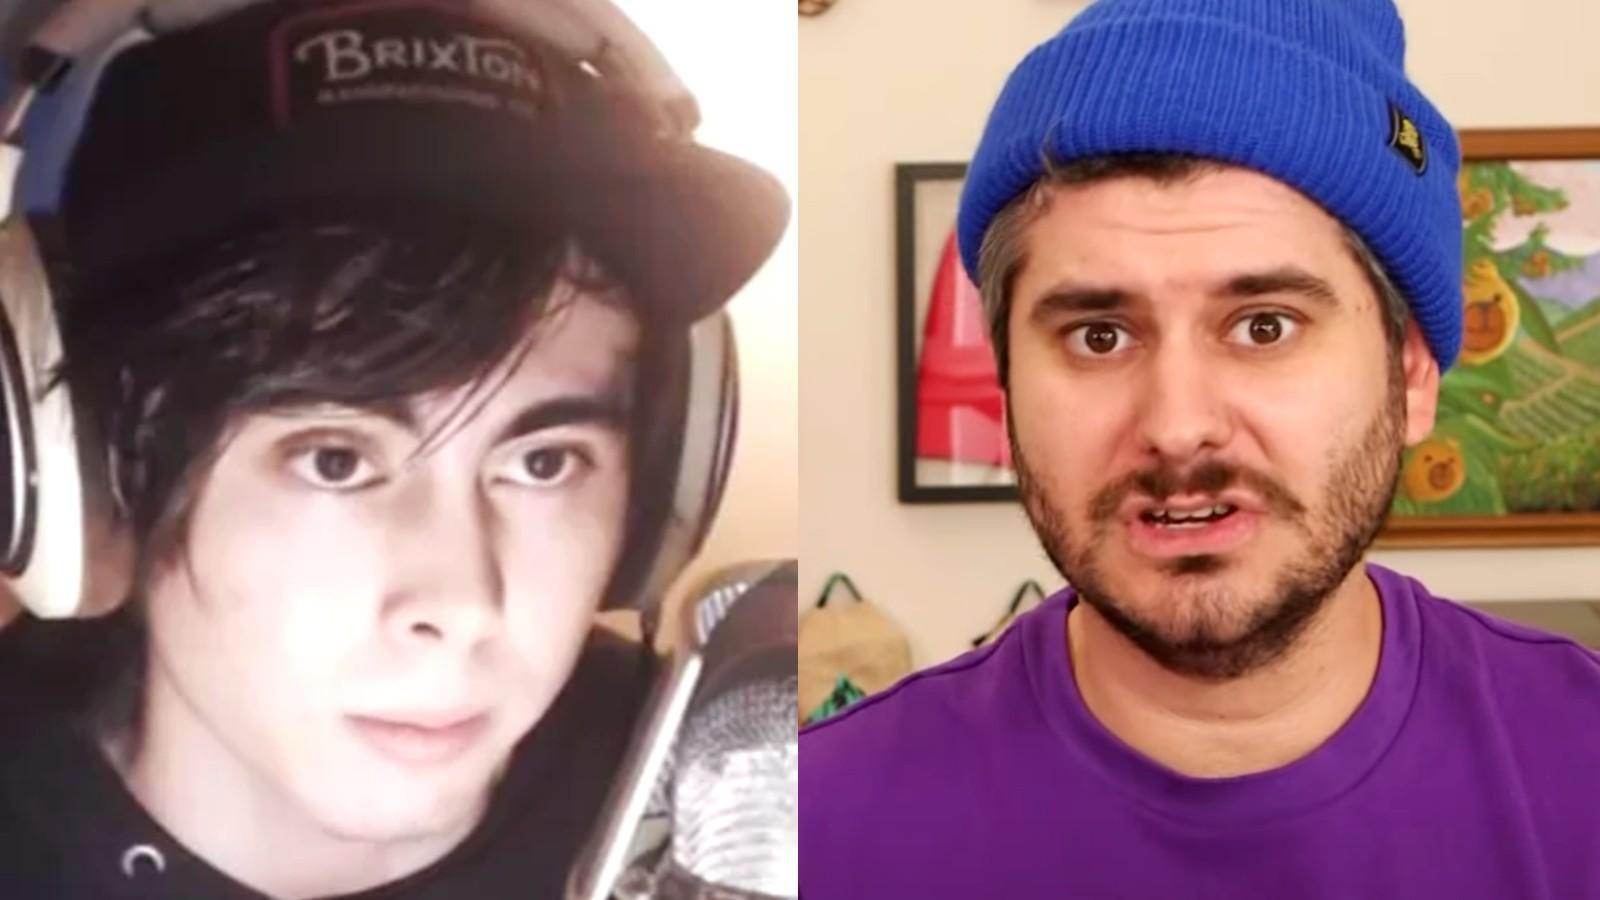 H3 calls out Leafy over "joke" about shooting someone